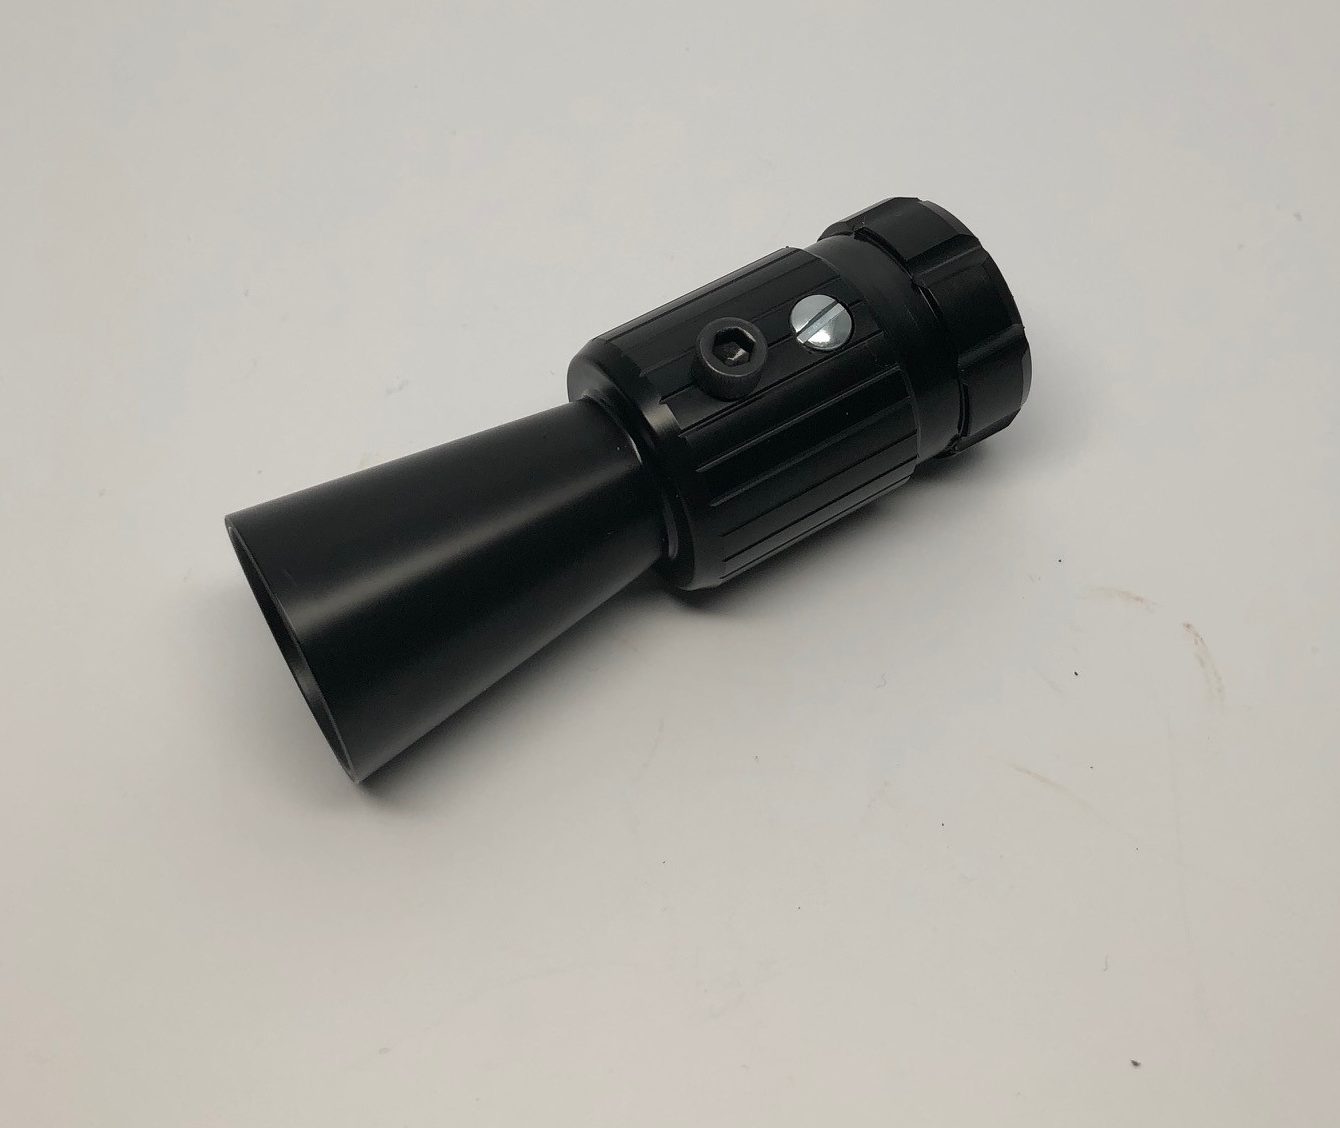 DL 44 Hansolo Flash Hider ROTJ MGC ...one scope-ring Delrin version 